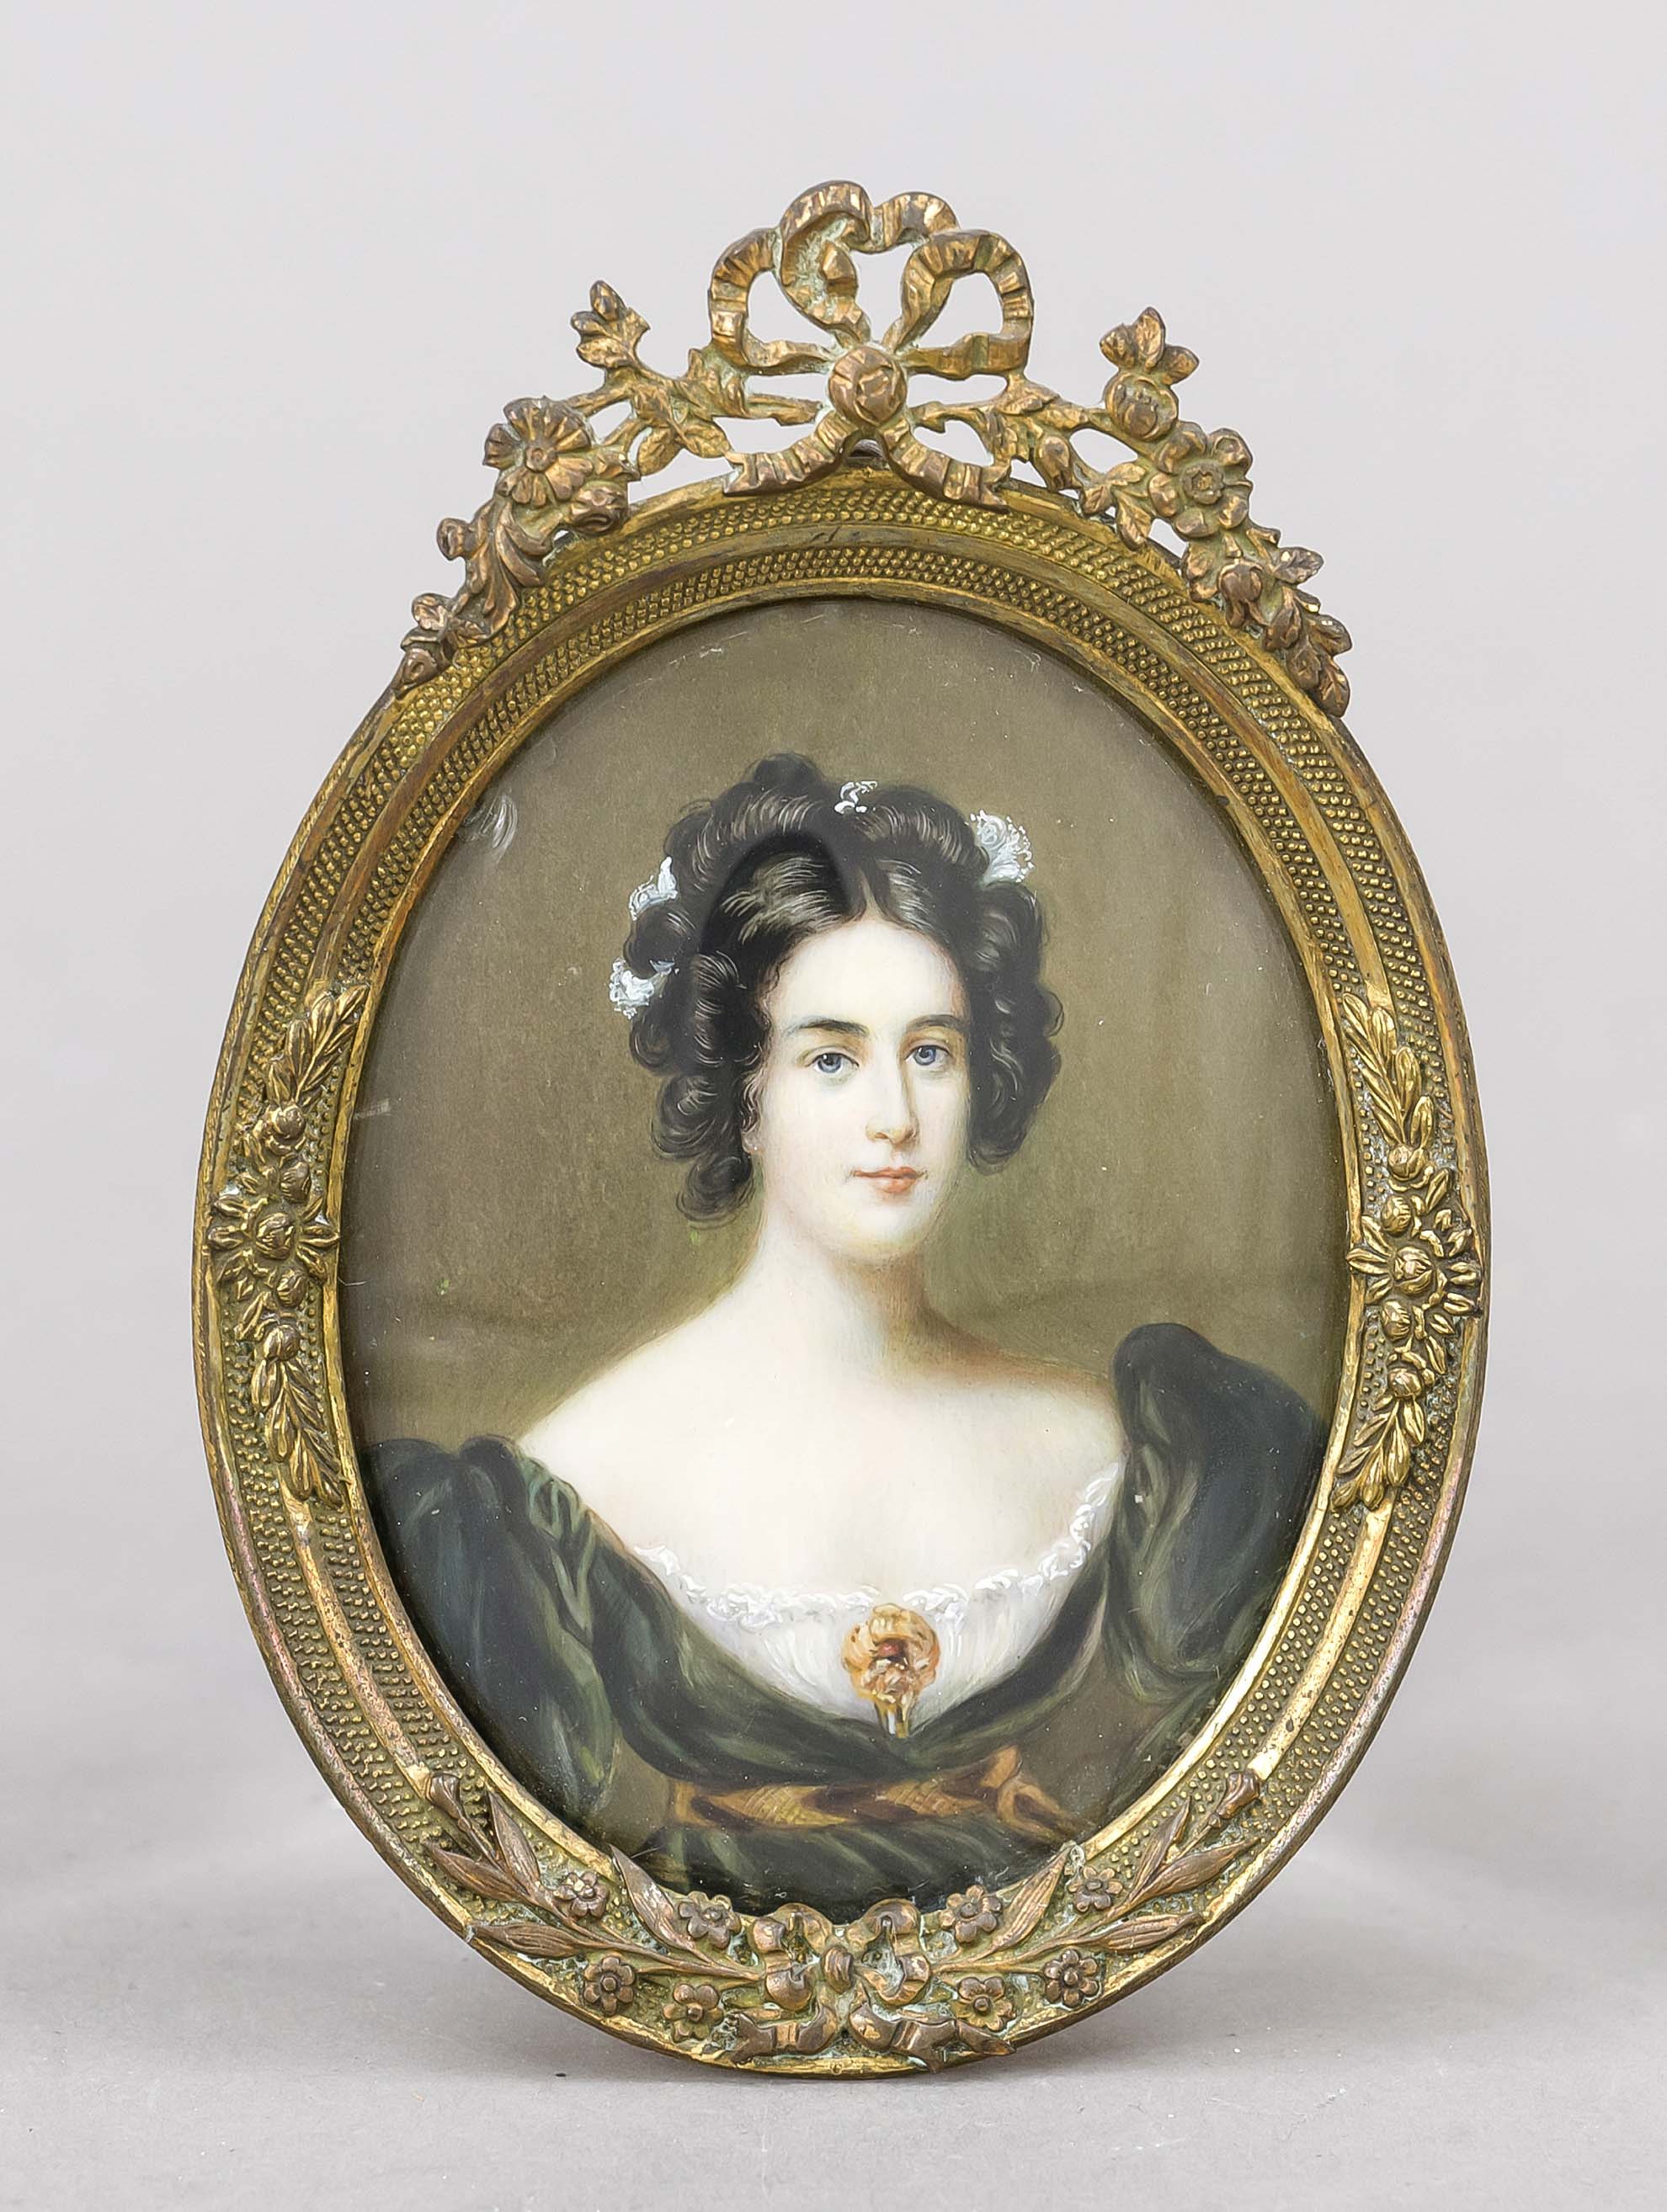 Miniature, 19th century, polychrome tempera painting on a bone plate, unopened, oval portrait of